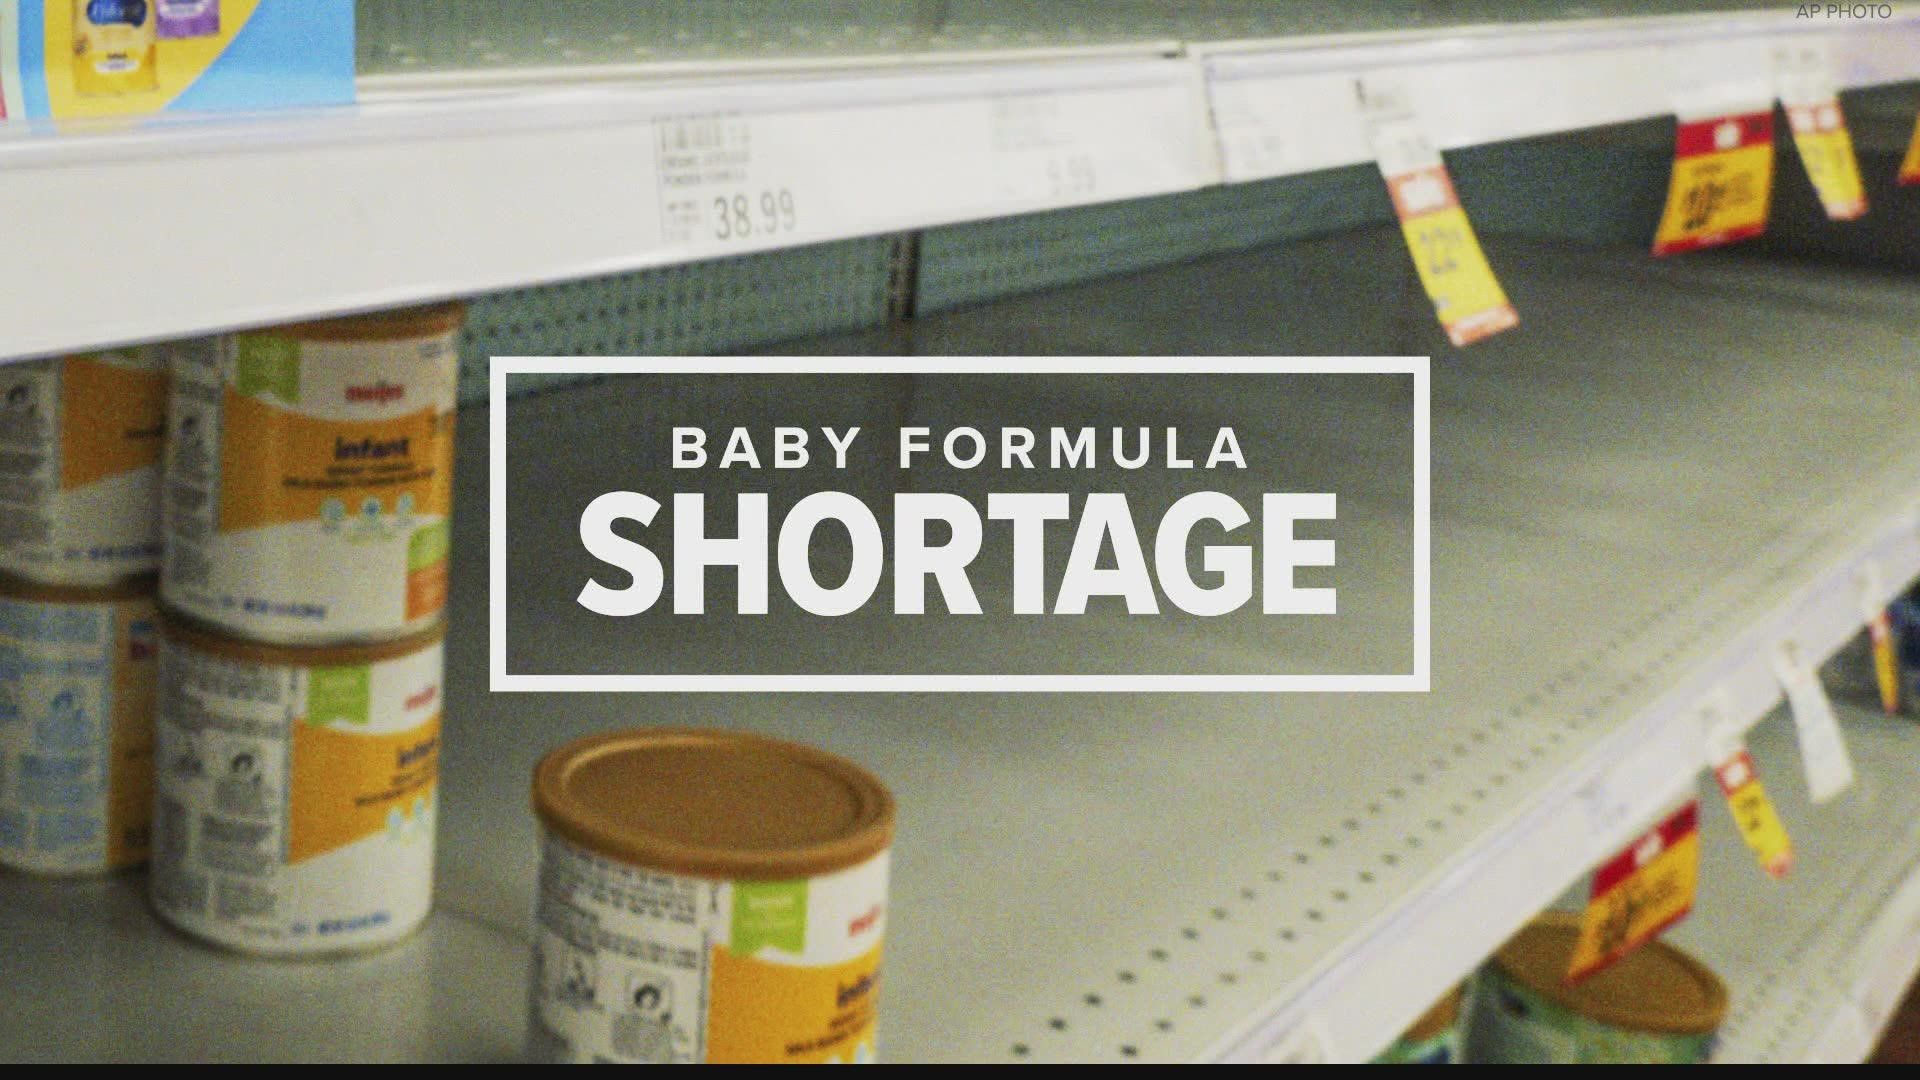 Baby formula production is now ramping up again, but it's still going to take some time to before store shelves fill up.